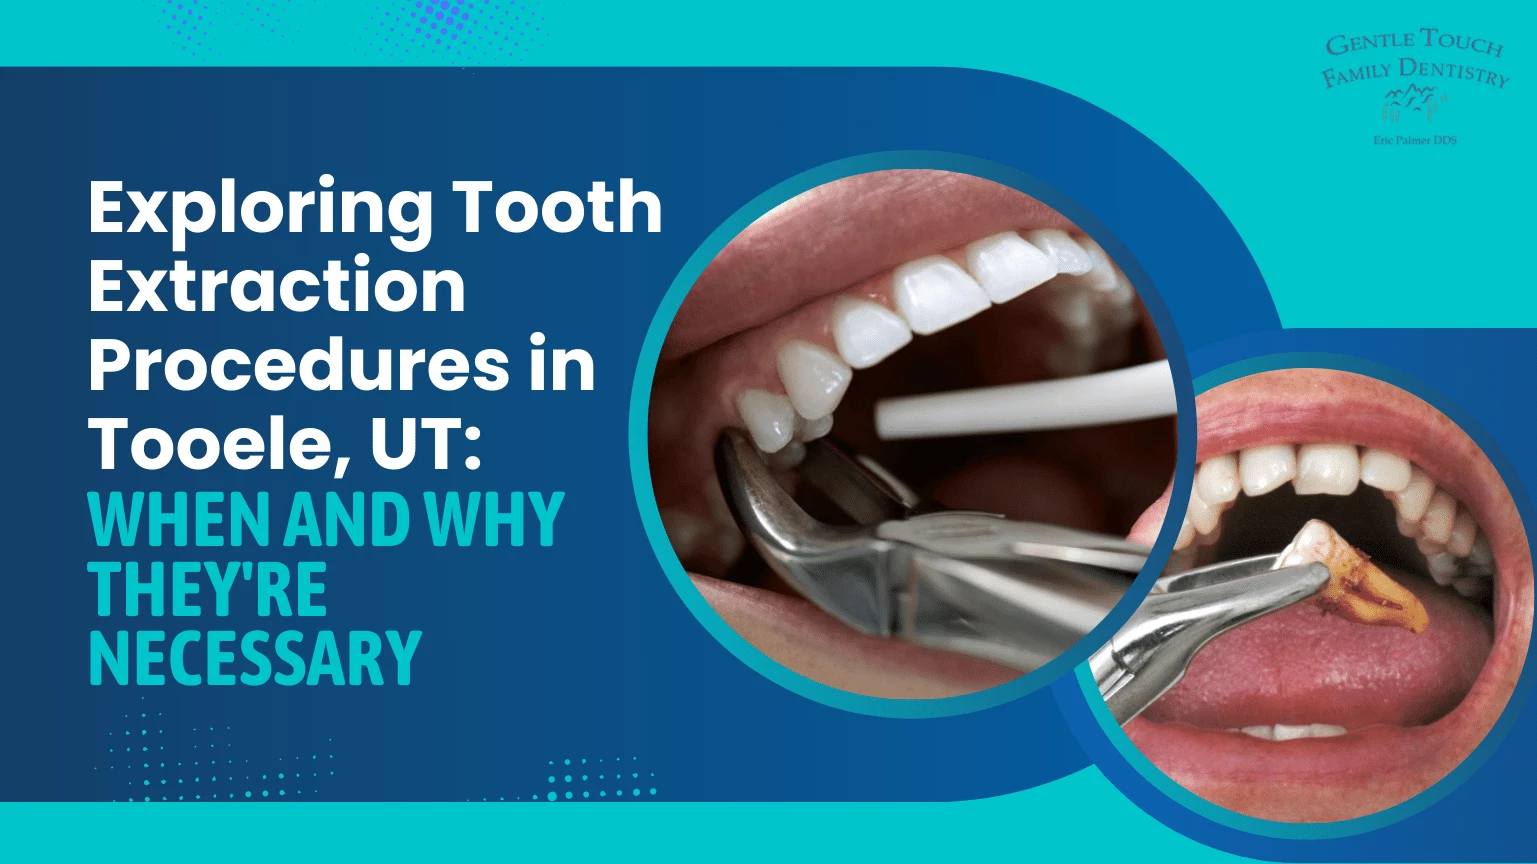 Exploring Tooth Extraction Procedures in Tooele, UT When and Why They're Necessary